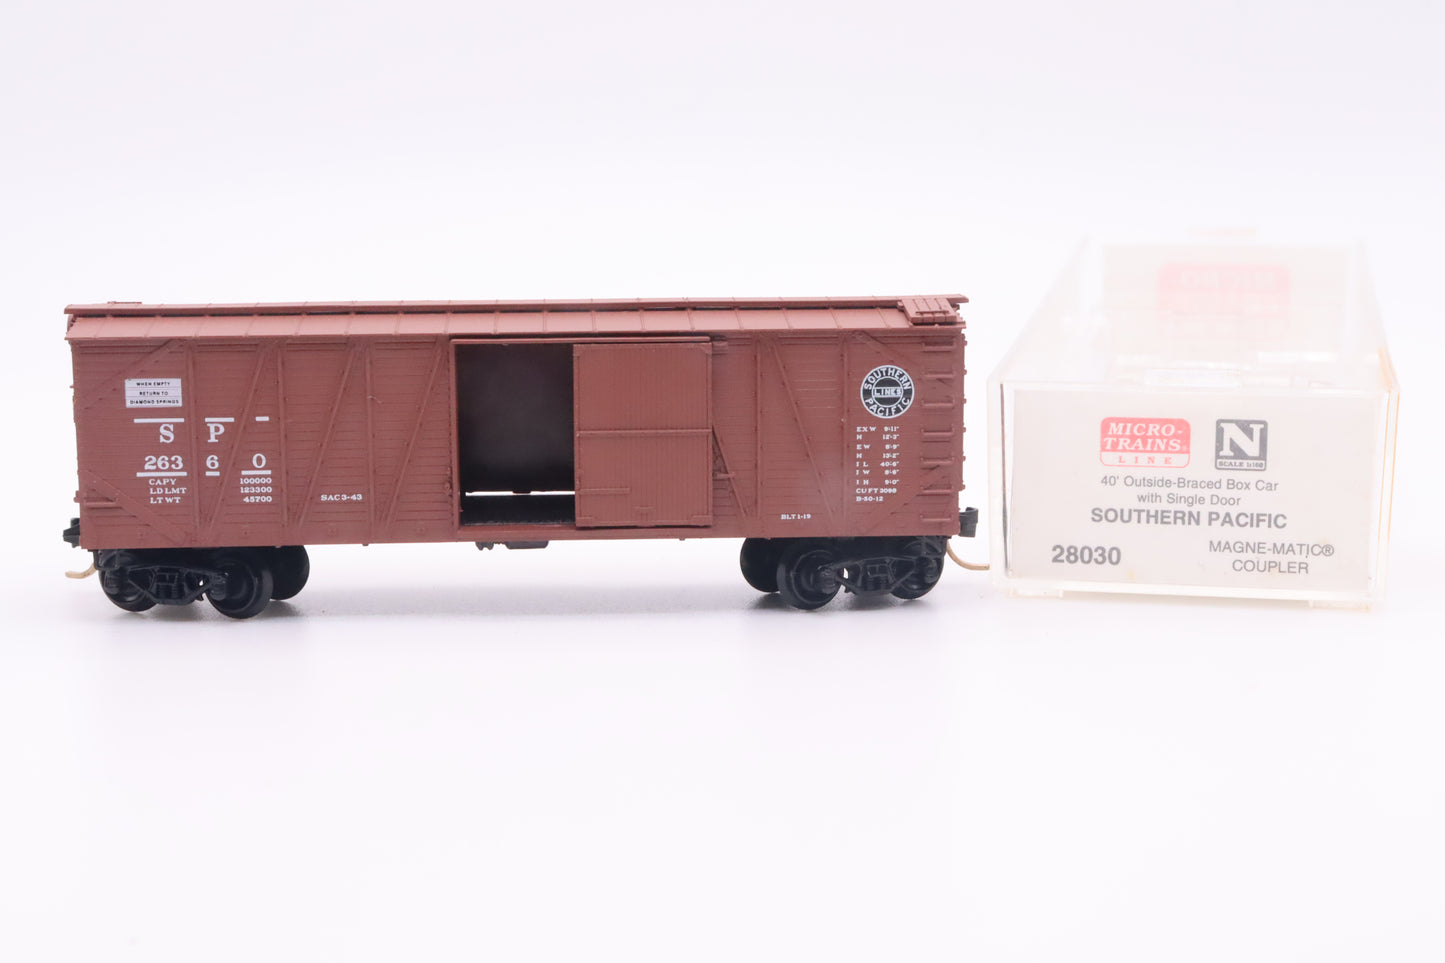 MTL-28030 - 40' Outside Braced Boxcar with Single Door - Southern Pacific - SP-26360